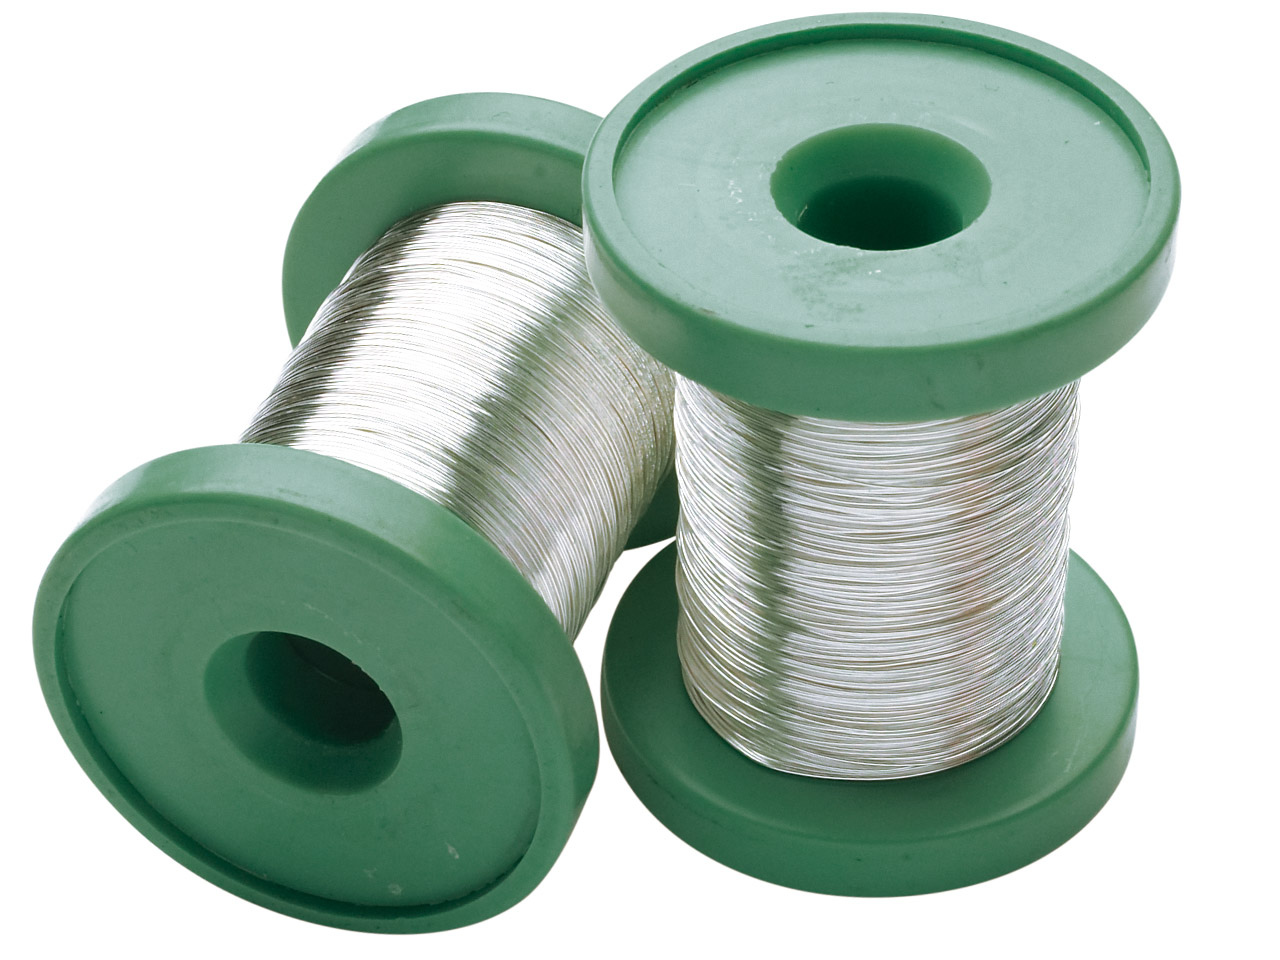 Fine Silver Round Wire 0.20mm Fully Annealed, 100gm Reels, 100% Recycled Silver Questions & Answers